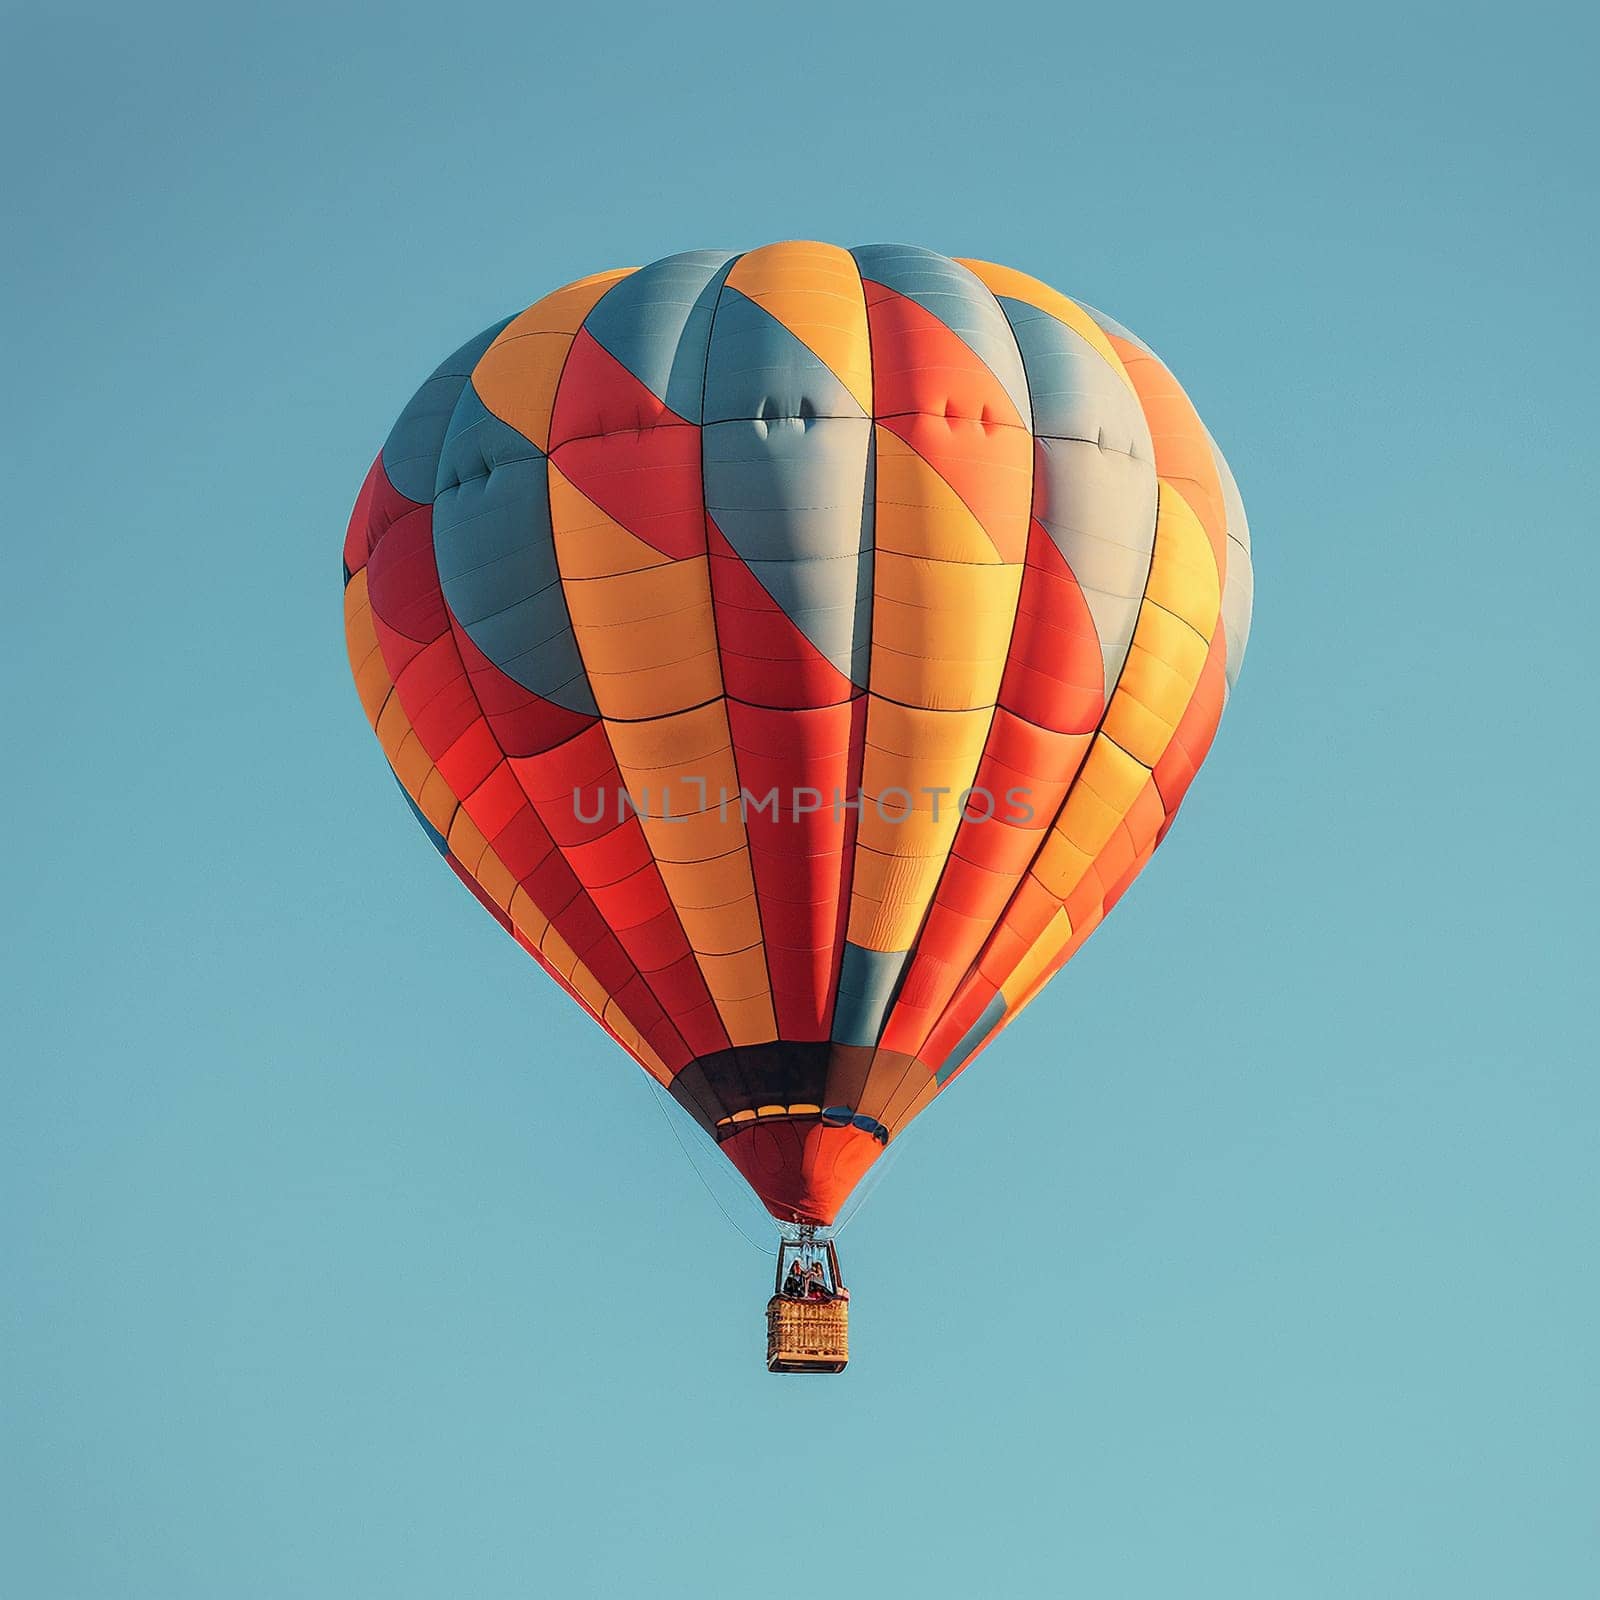 A colorful hot air balloon floating against a clear blue sky, representing freedom and adventure.